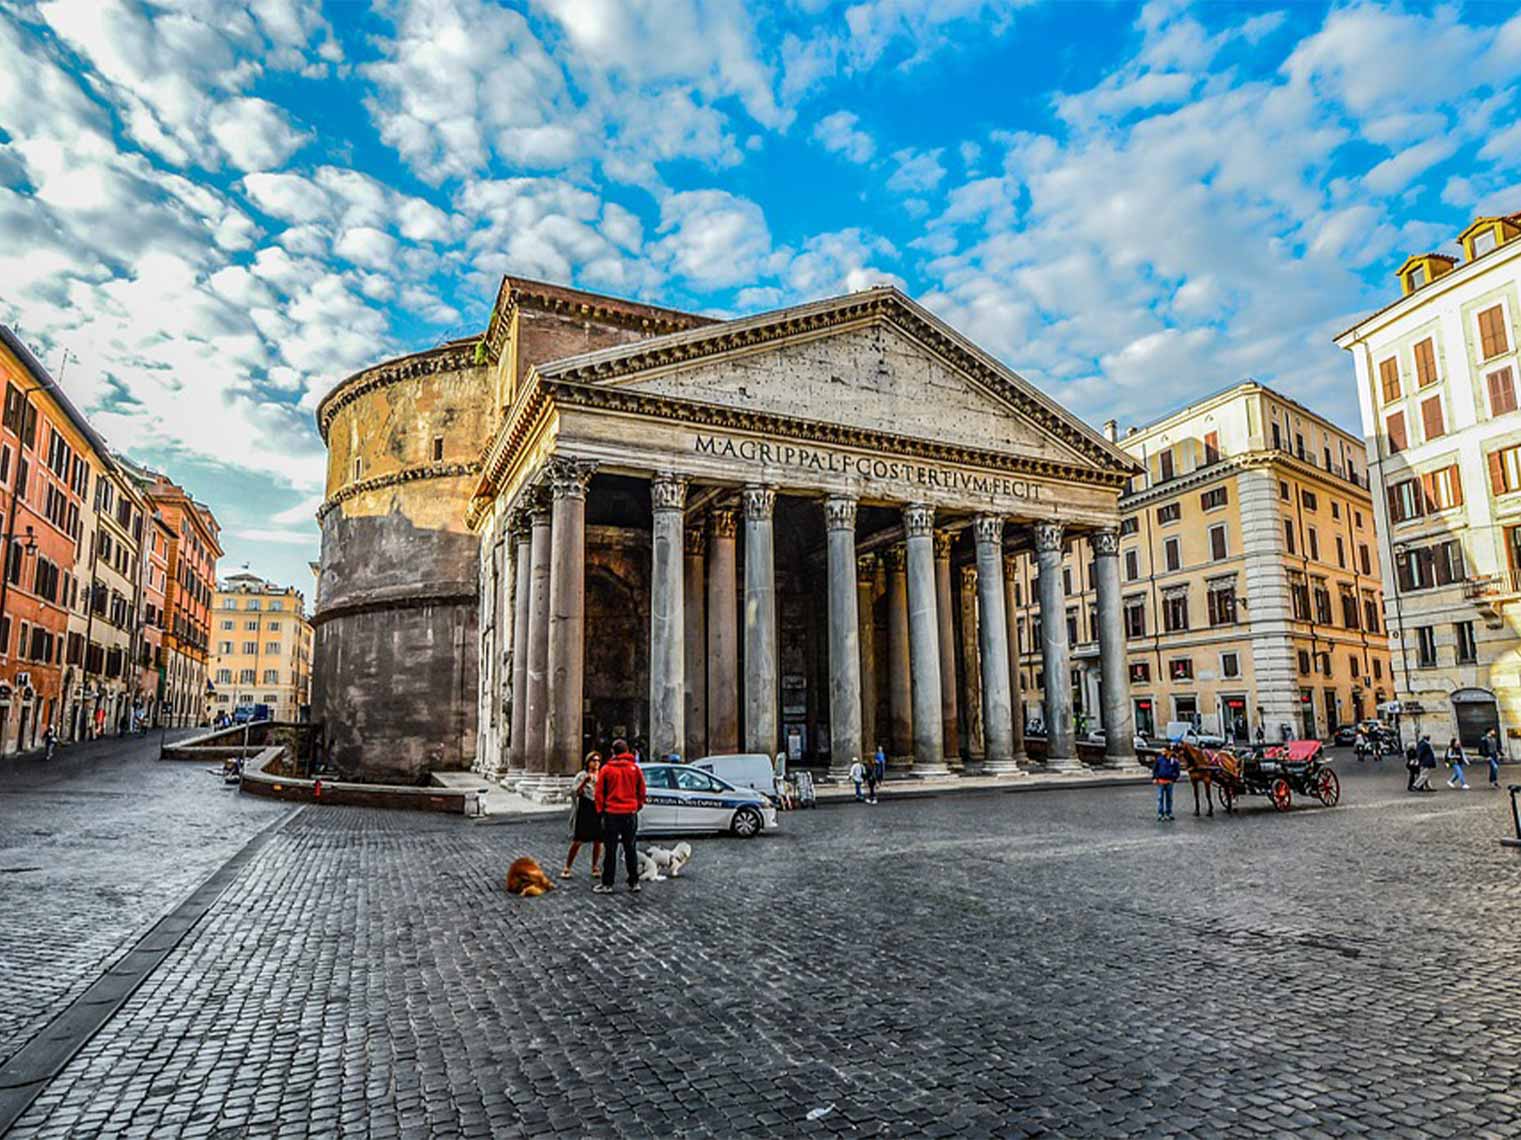 What is the official language spoken in Rome?